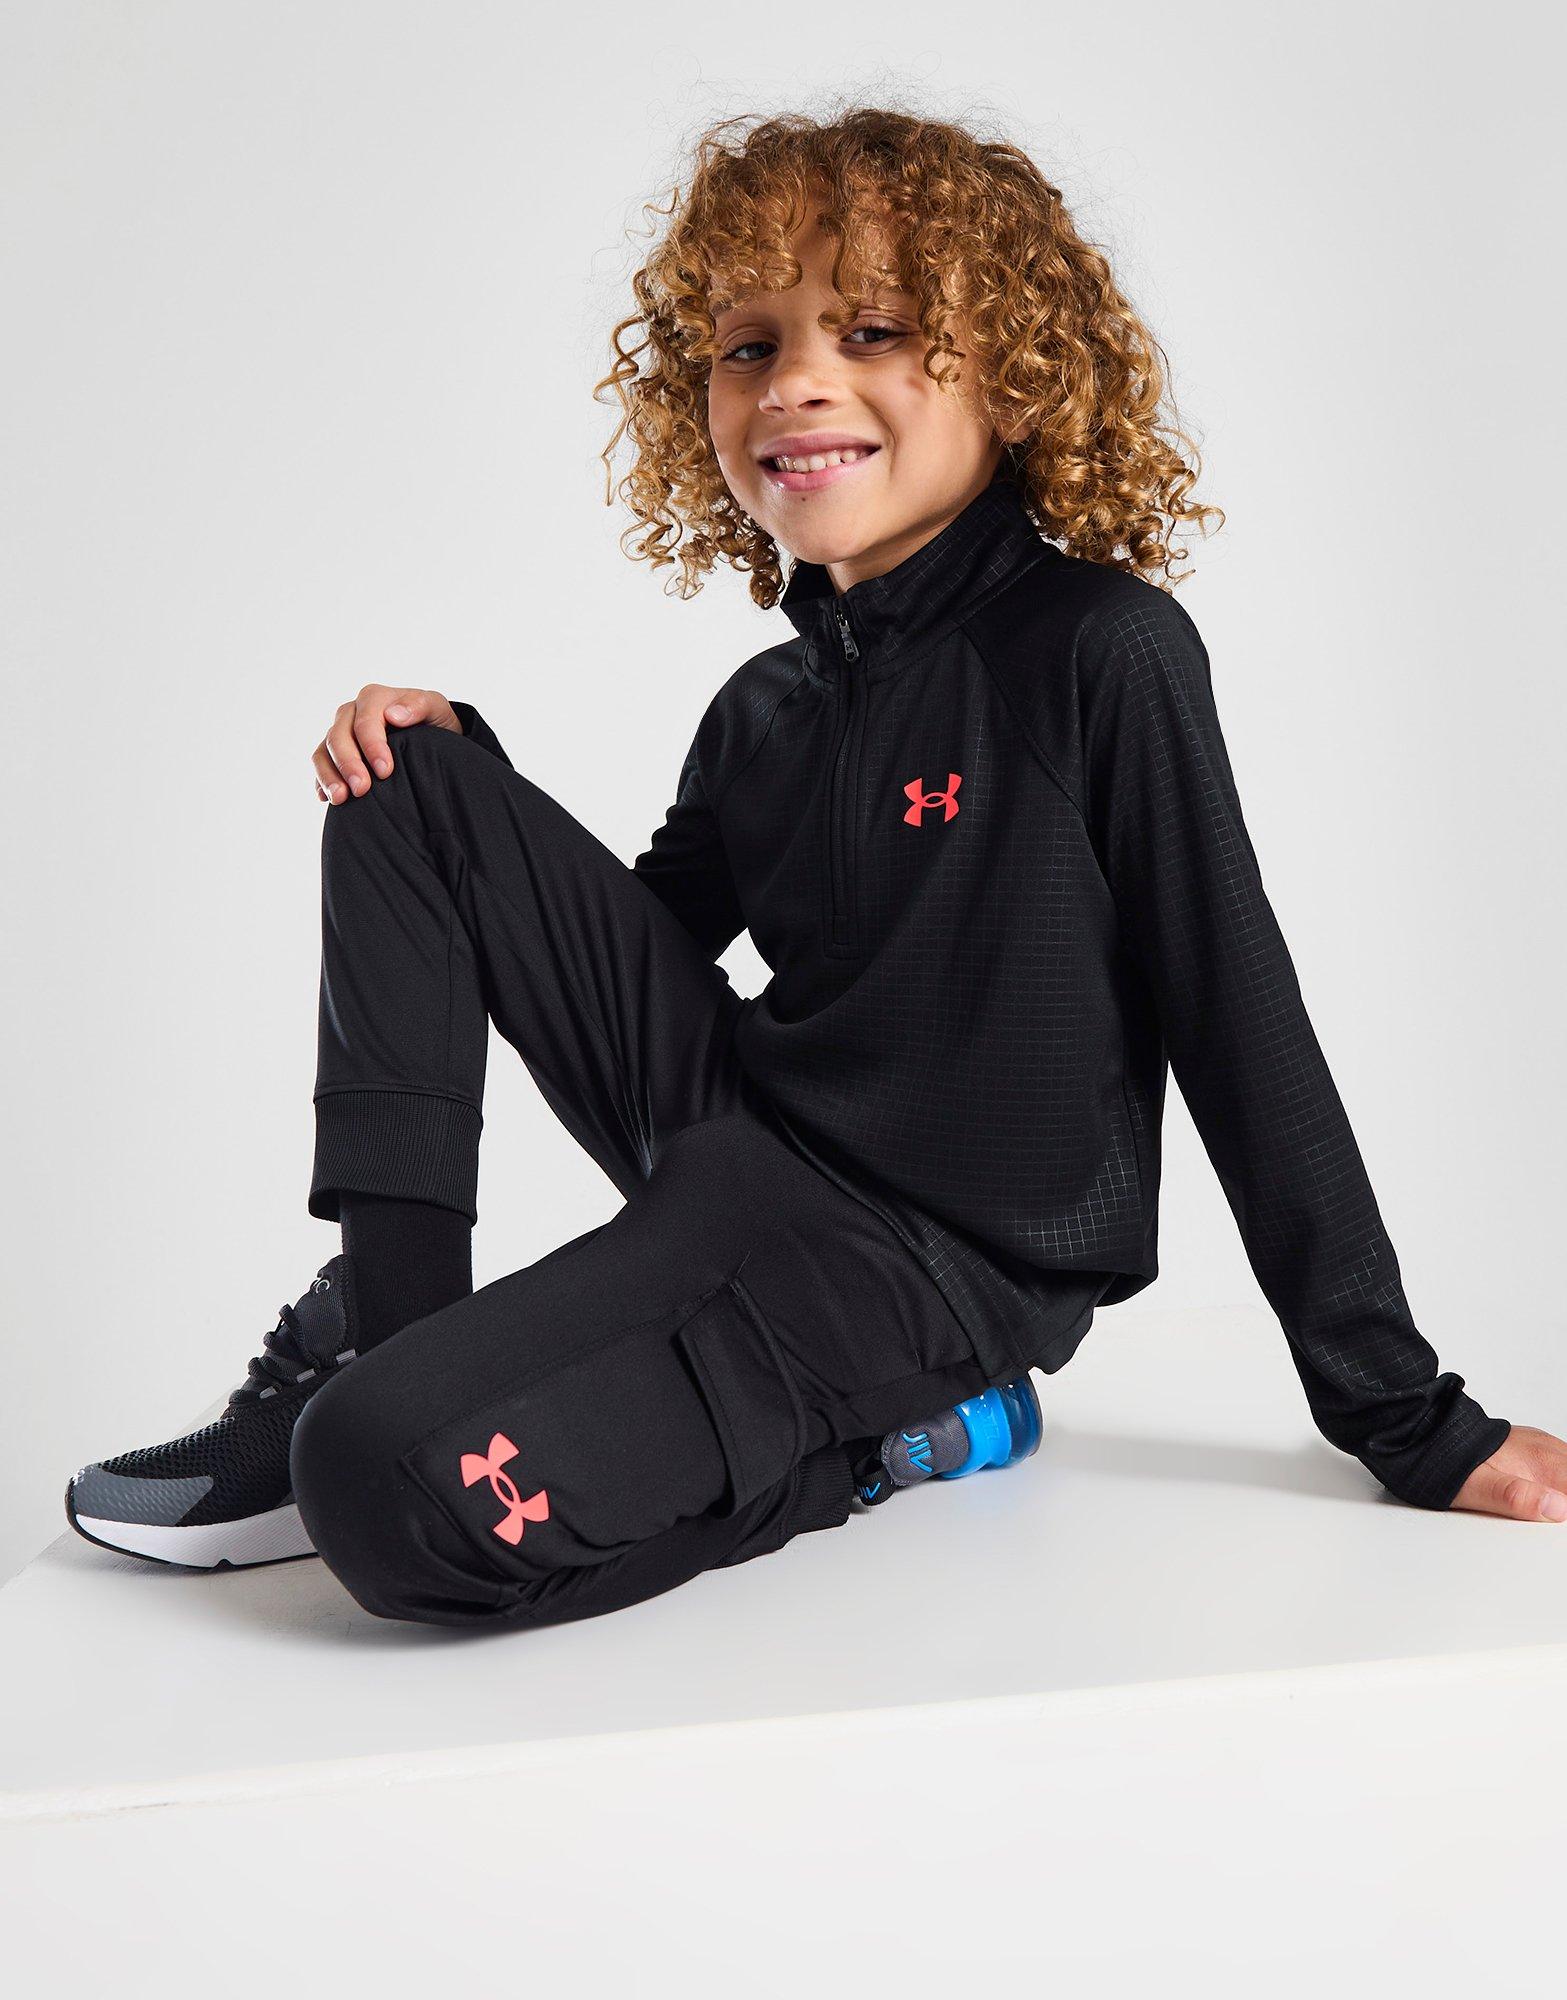 14+ Under Armour Gift Card